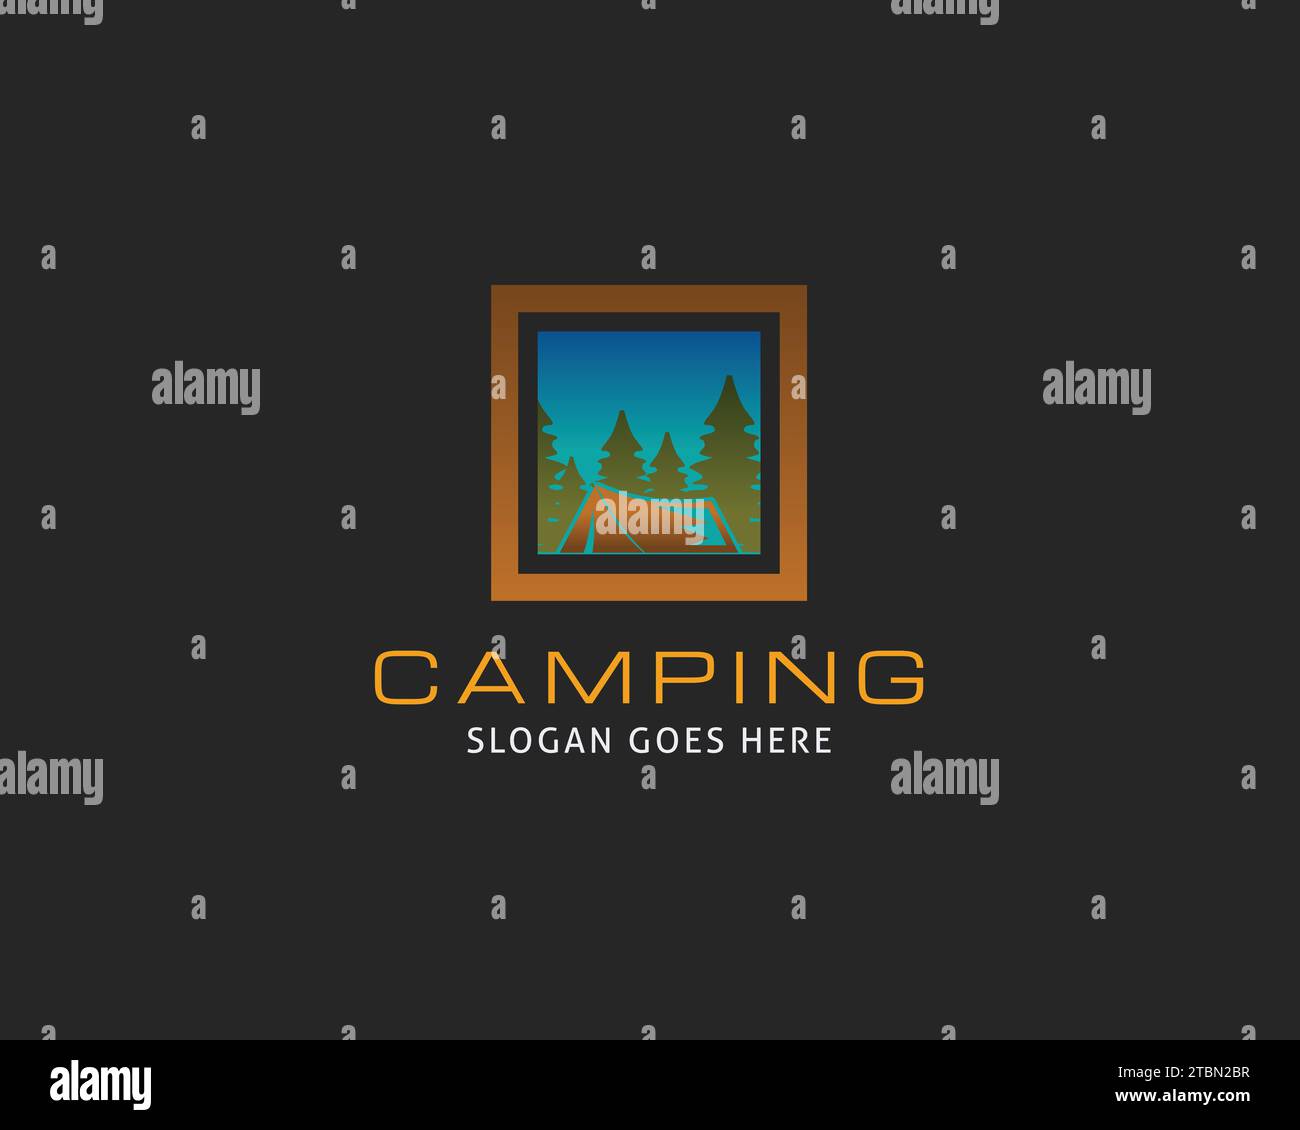 Camping and outdoor adventure logo Stock Vector